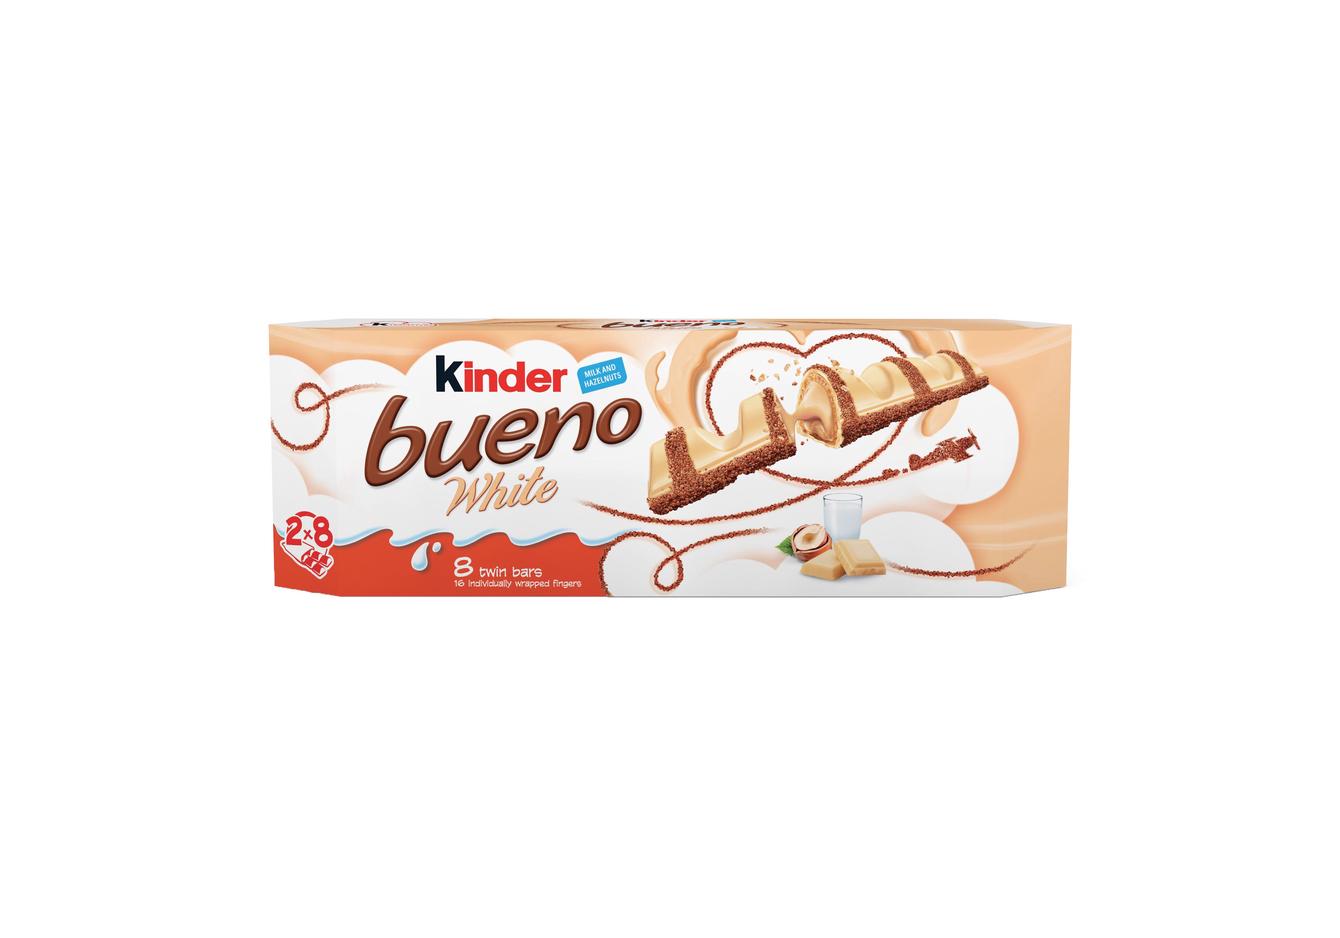 Kinder Bueno - Pairing Kinder Bueno with coffee is always a slam